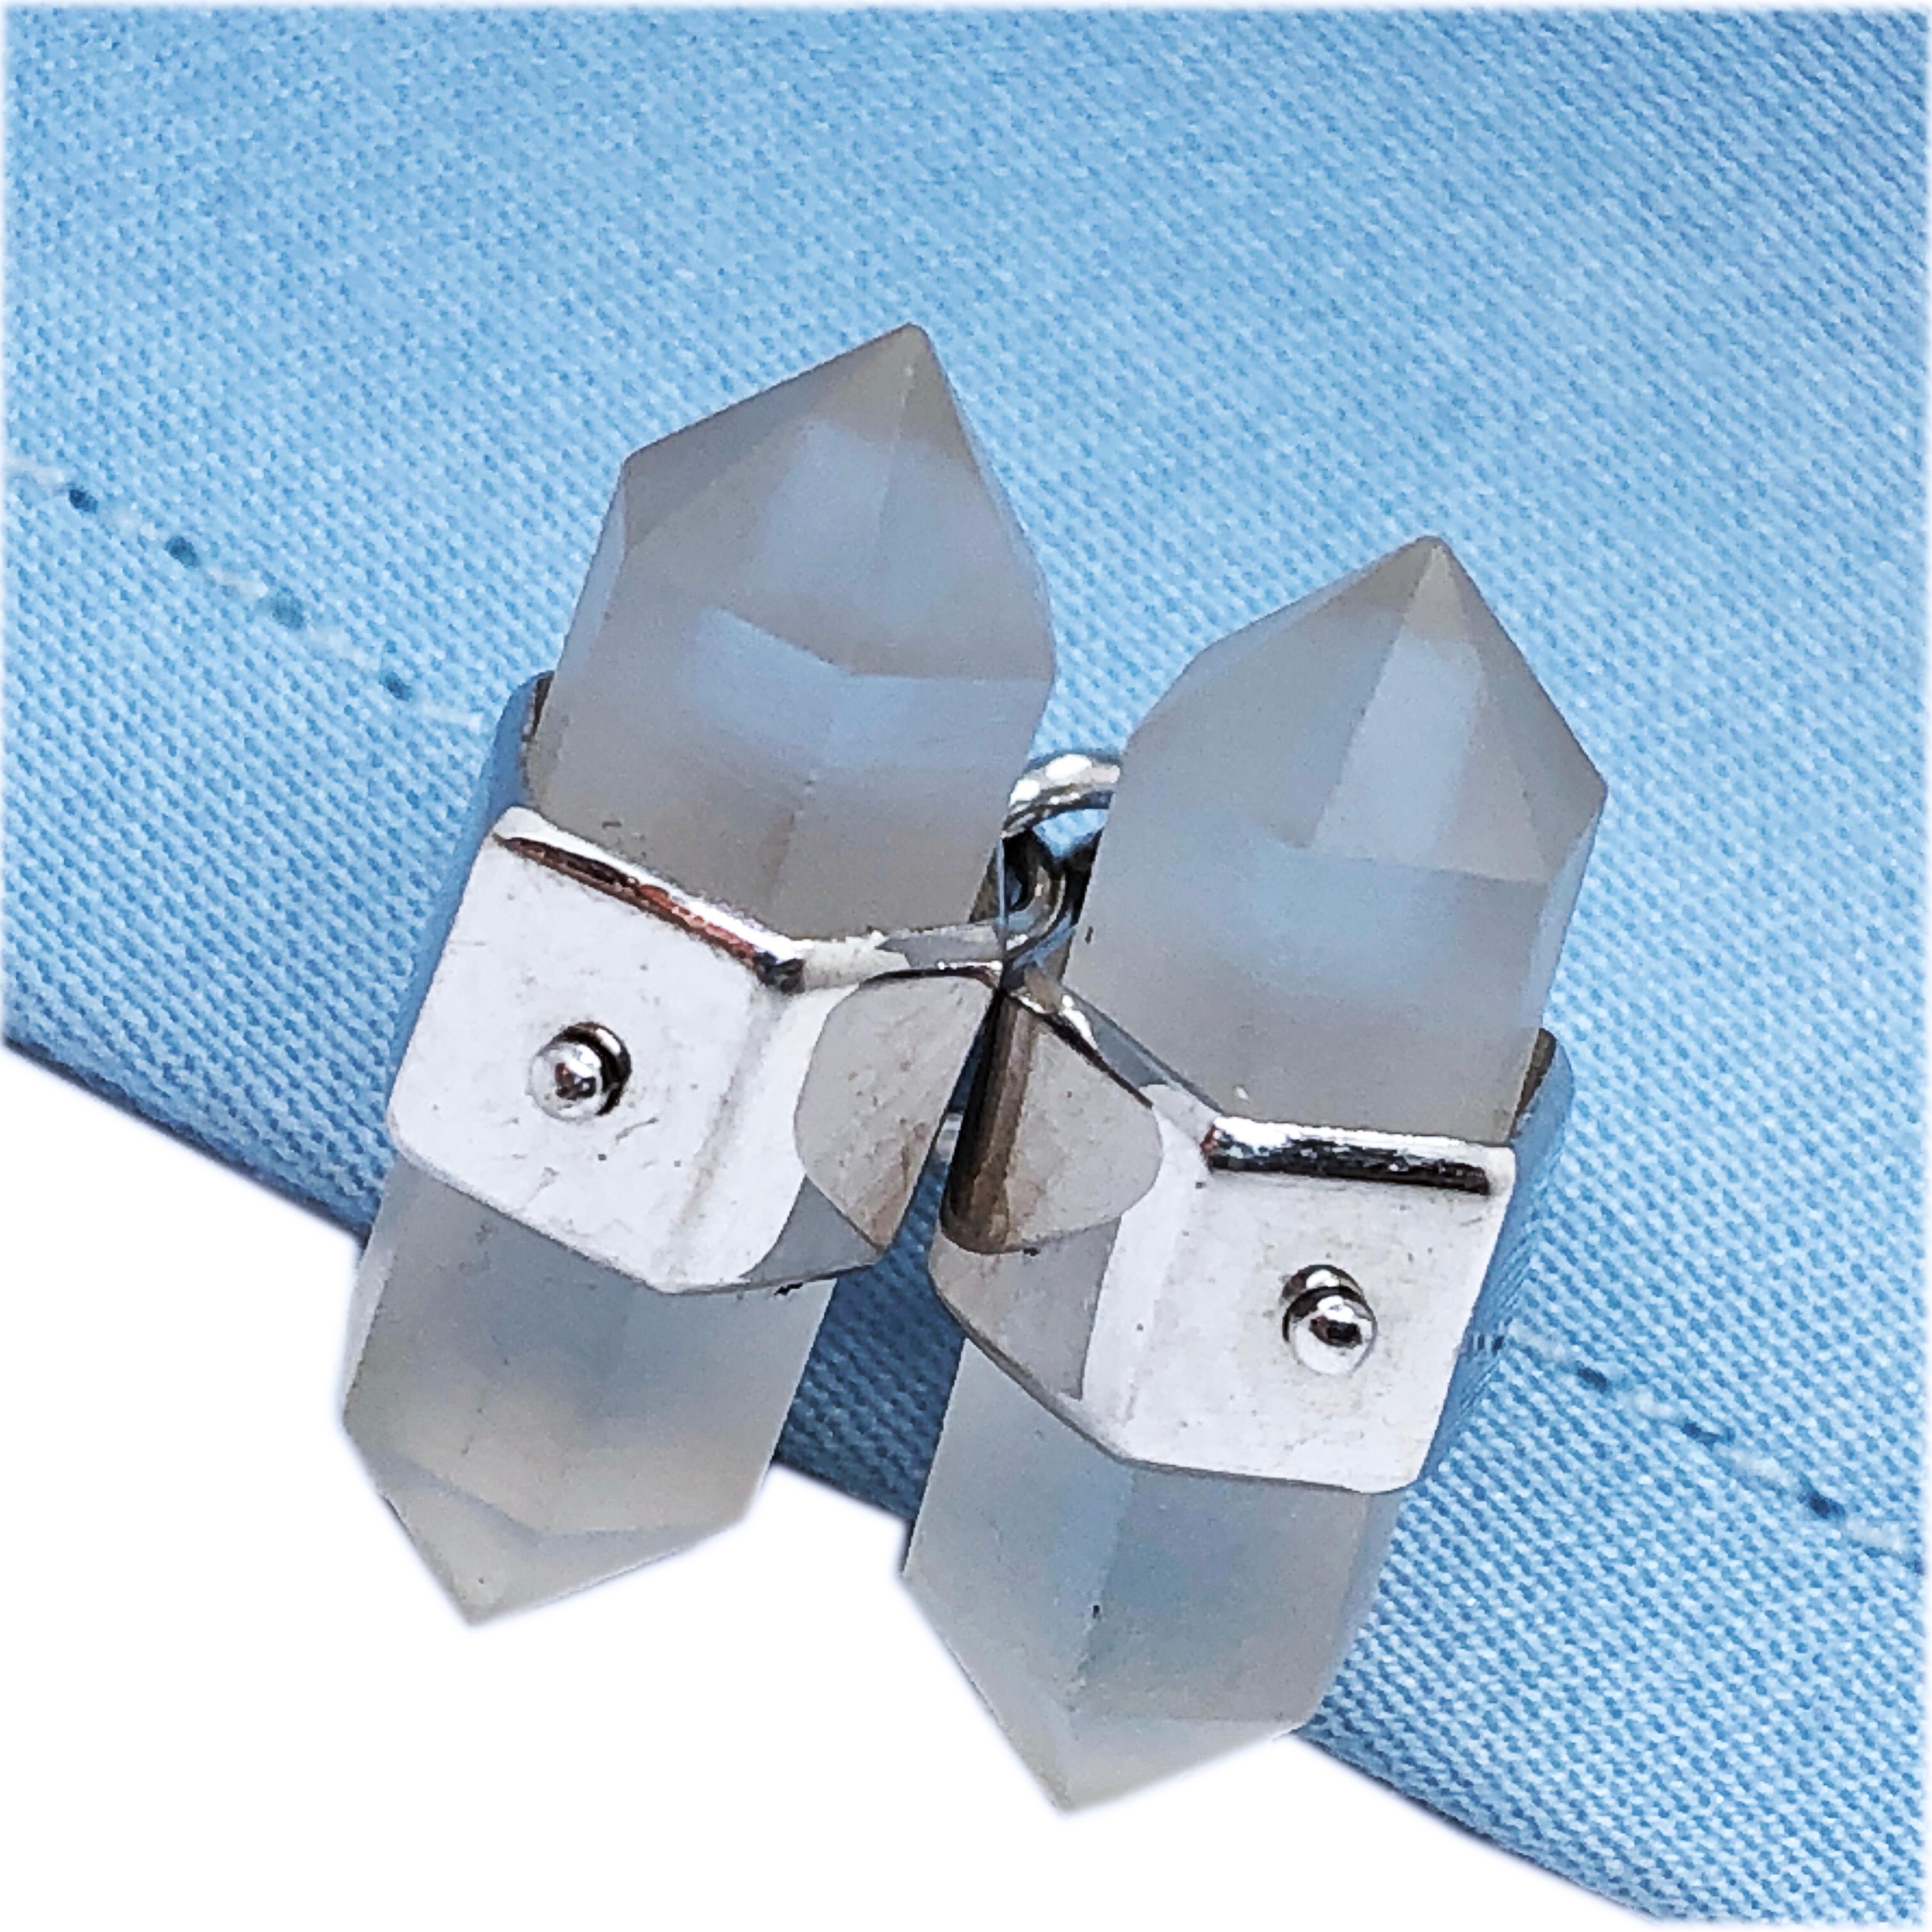 Unique, Chic Hand Inlaid Cufflinks featuring Four Rock Crystal Pencils Shaped in an 18k White Gold Setting, fatto a mano.
In an elegant black box and pouch.

